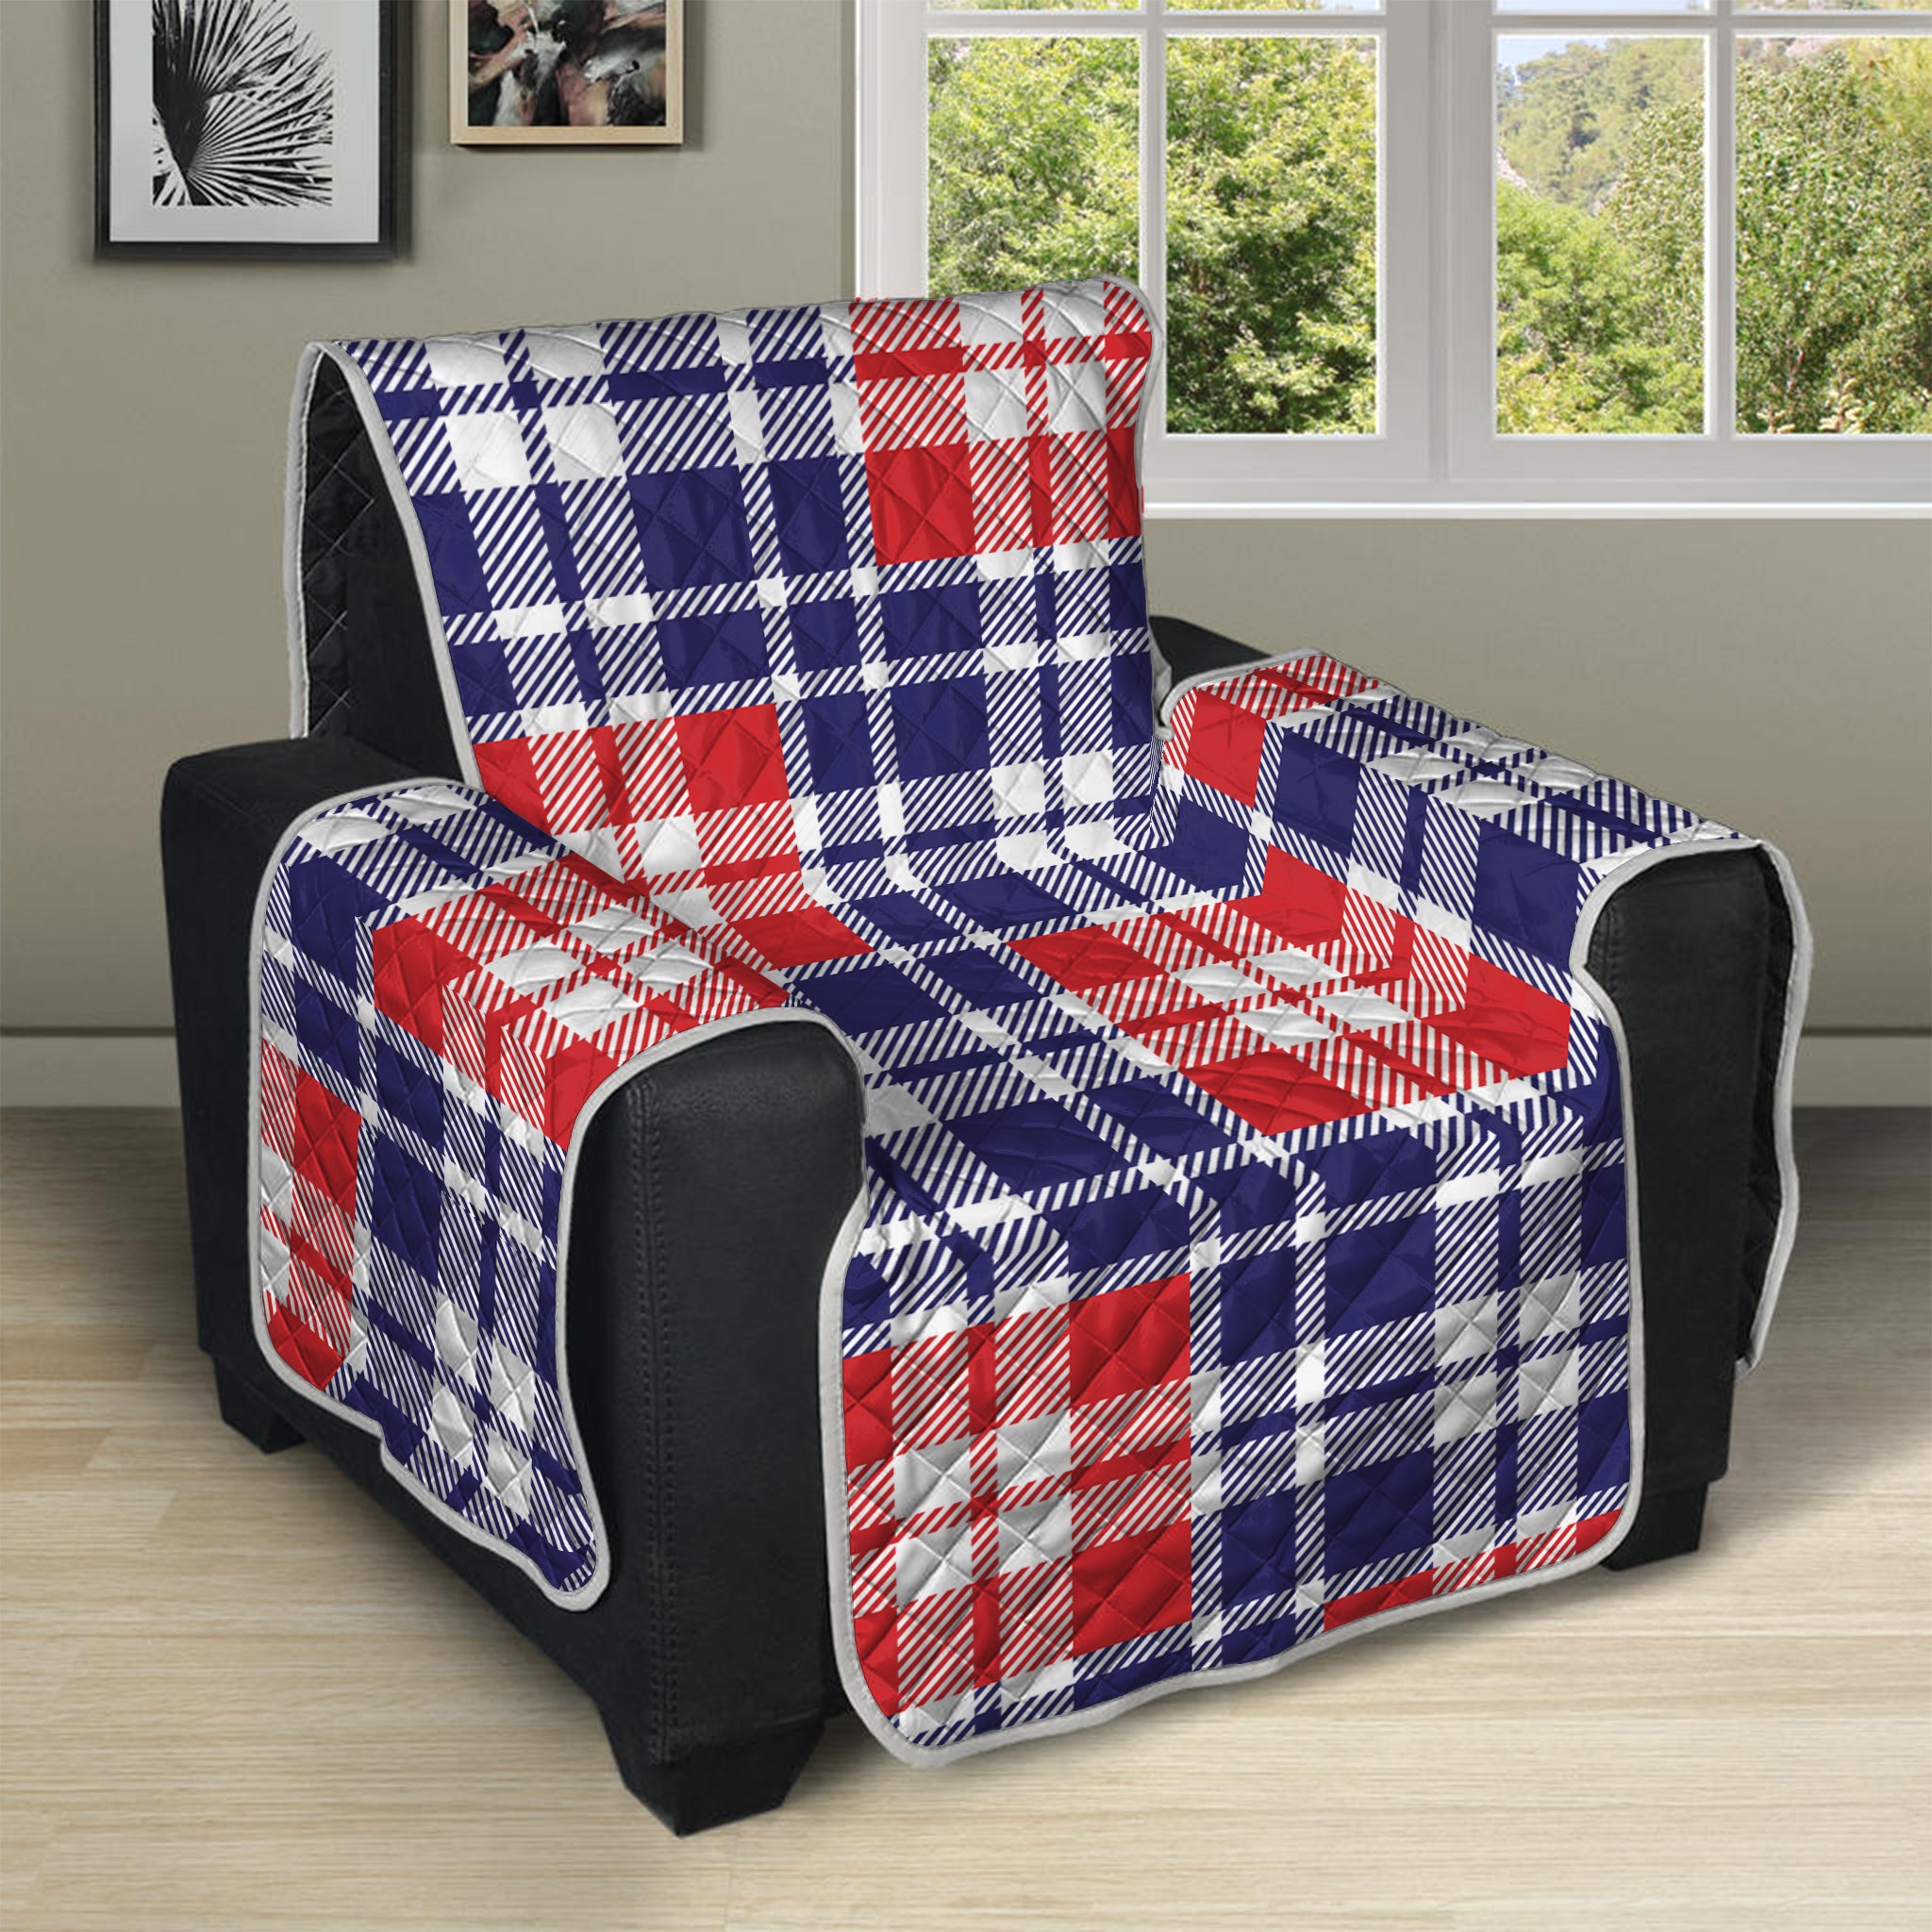 American Independence Day Plaid Print Recliner Protector